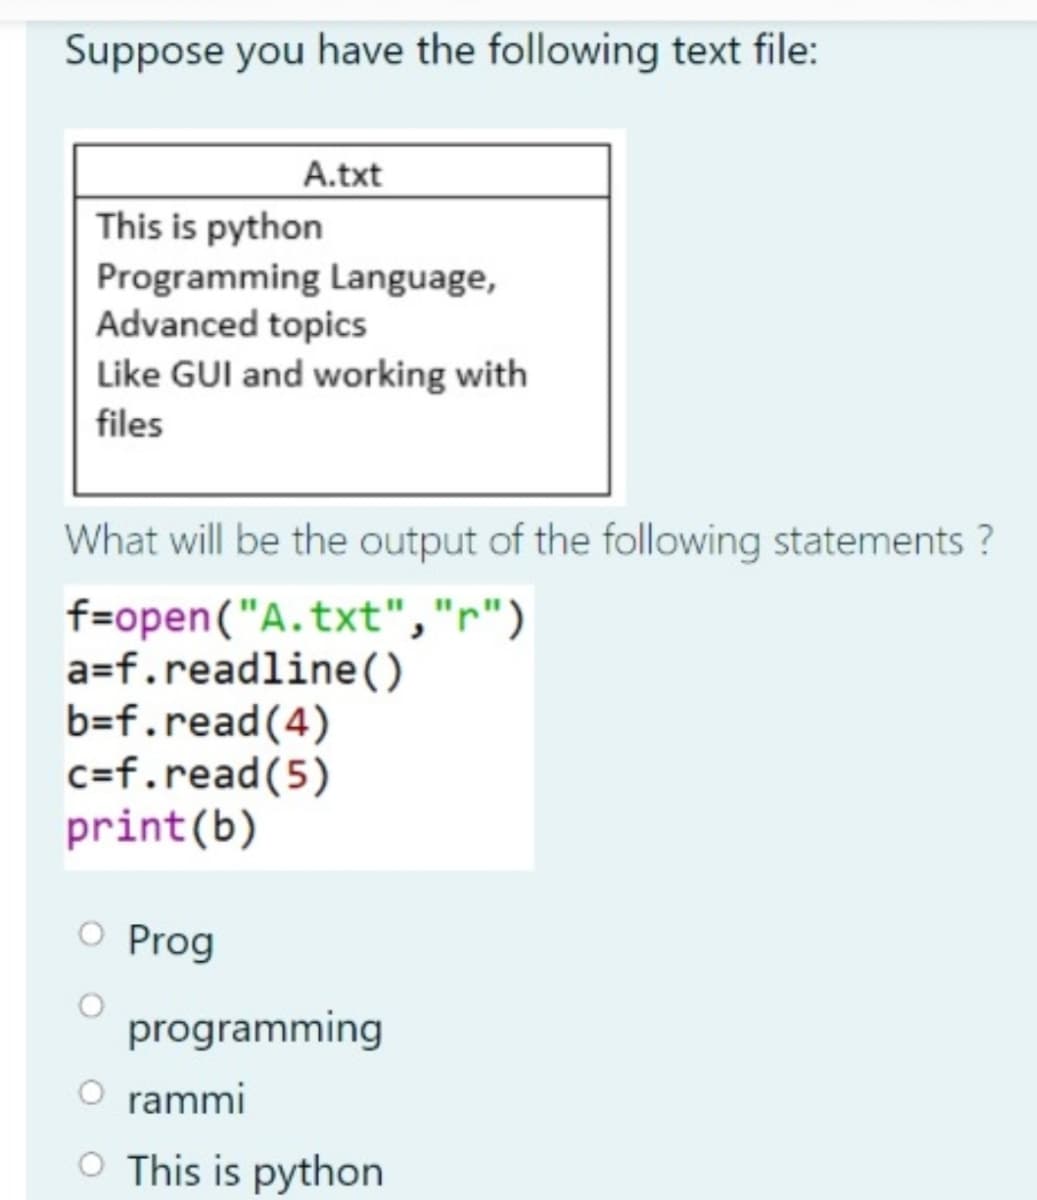 Suppose you have the following text file:
A.txt
This is python
Programming Language,
Advanced topics
Like GUI and working with
files
What will be the output of the following statements ?
f=open("A.txt","r")
a=f.readline()
b=f.read(4)
c=f.read(5)
print(b)
O Prog
programming
O rammi
O This is python
